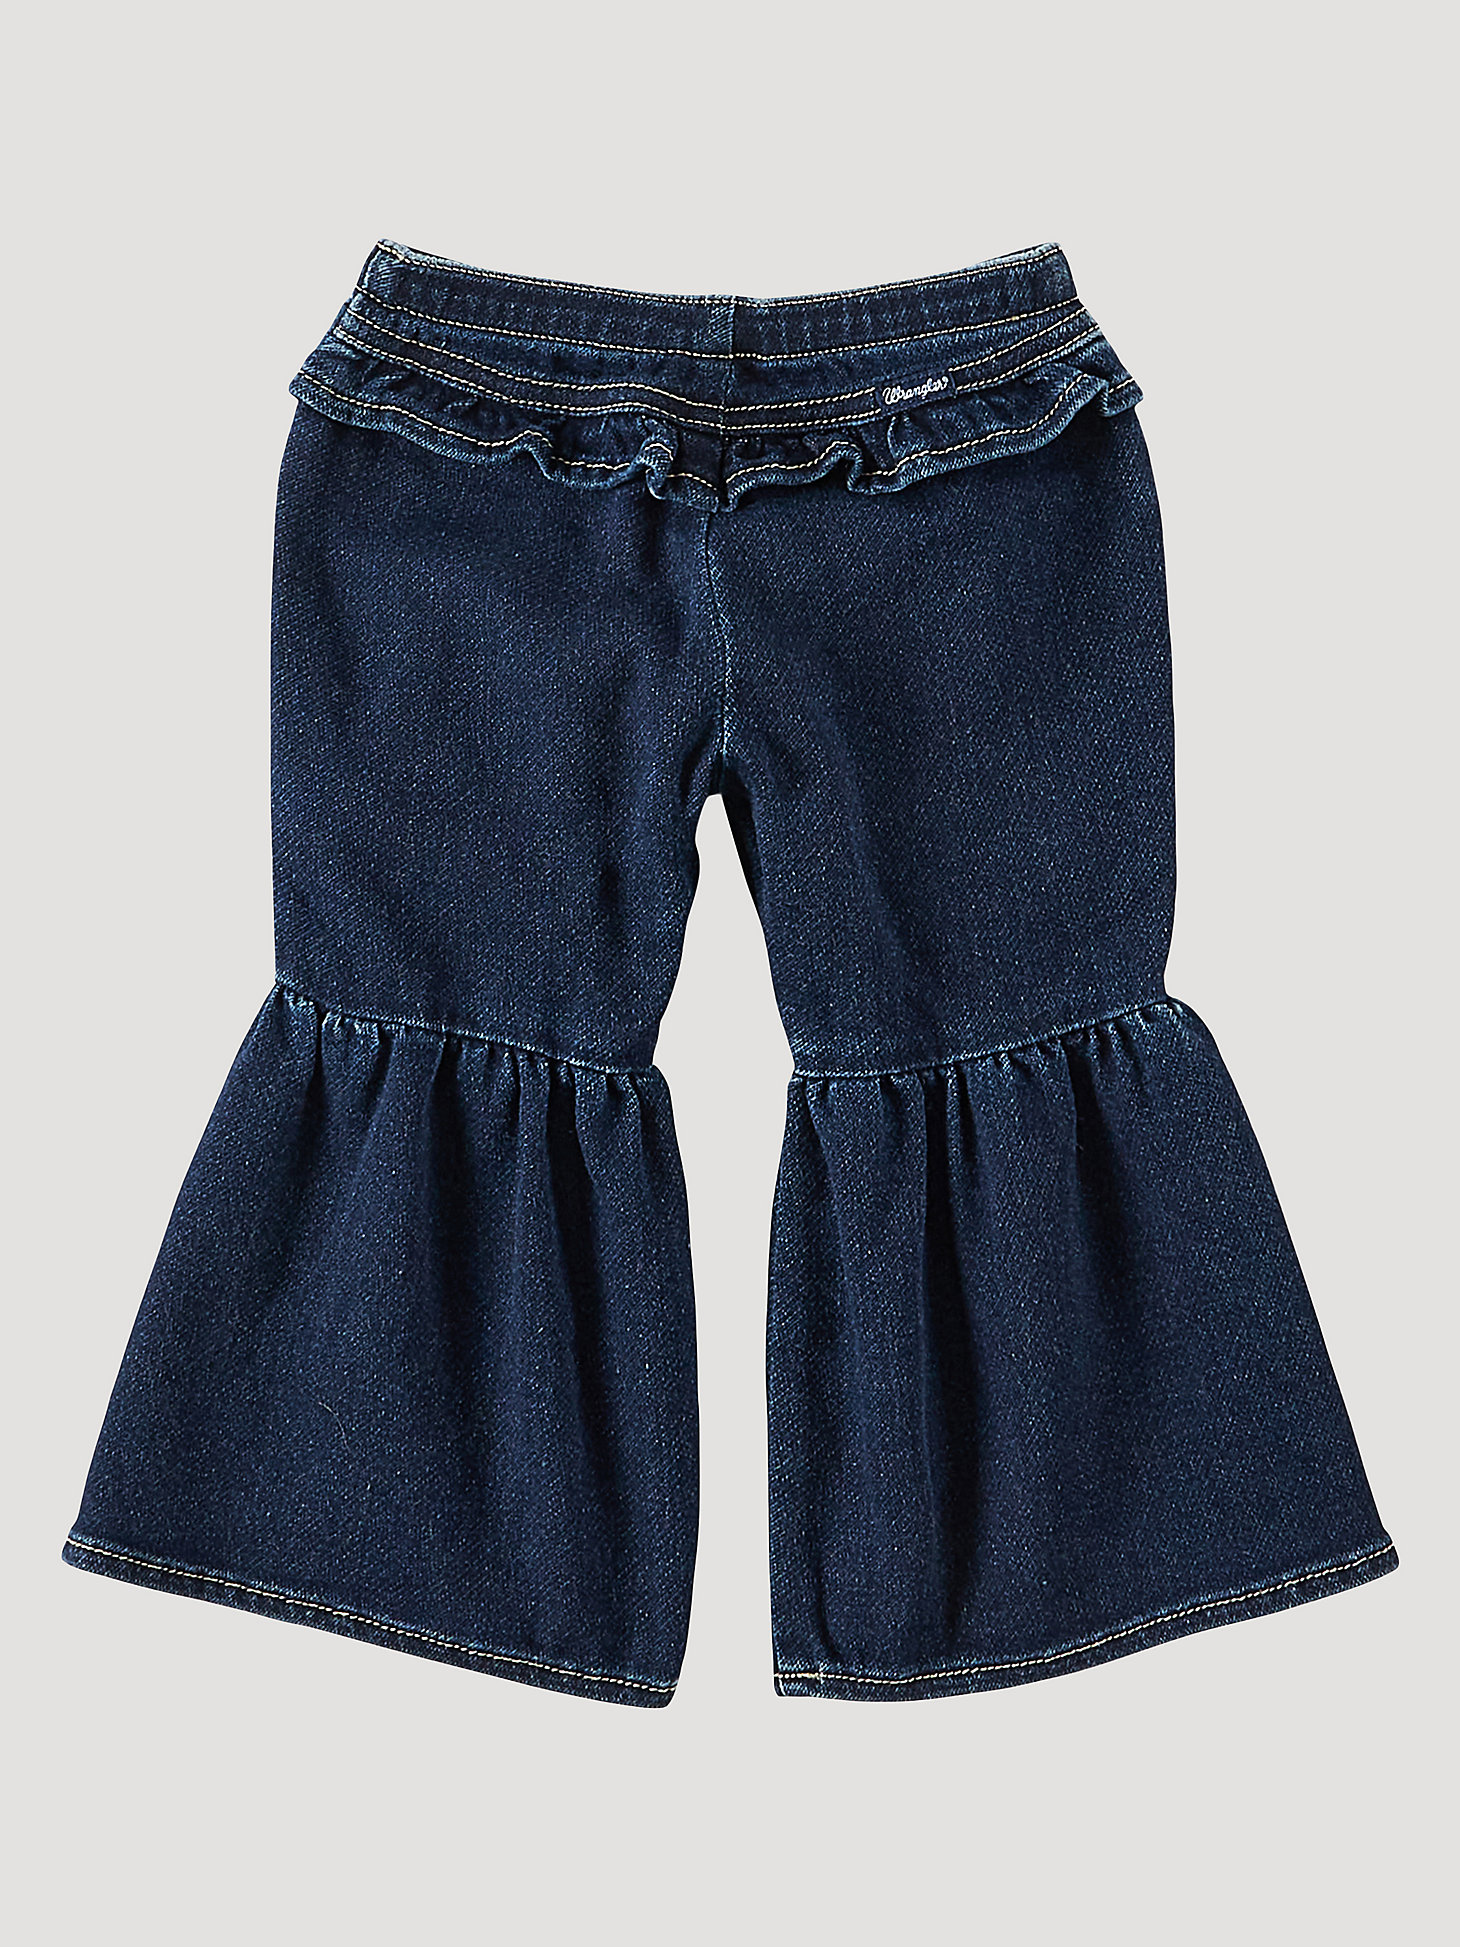 Baby Girl Ruffle Leg Flare Jean in Lacey alternative view 1